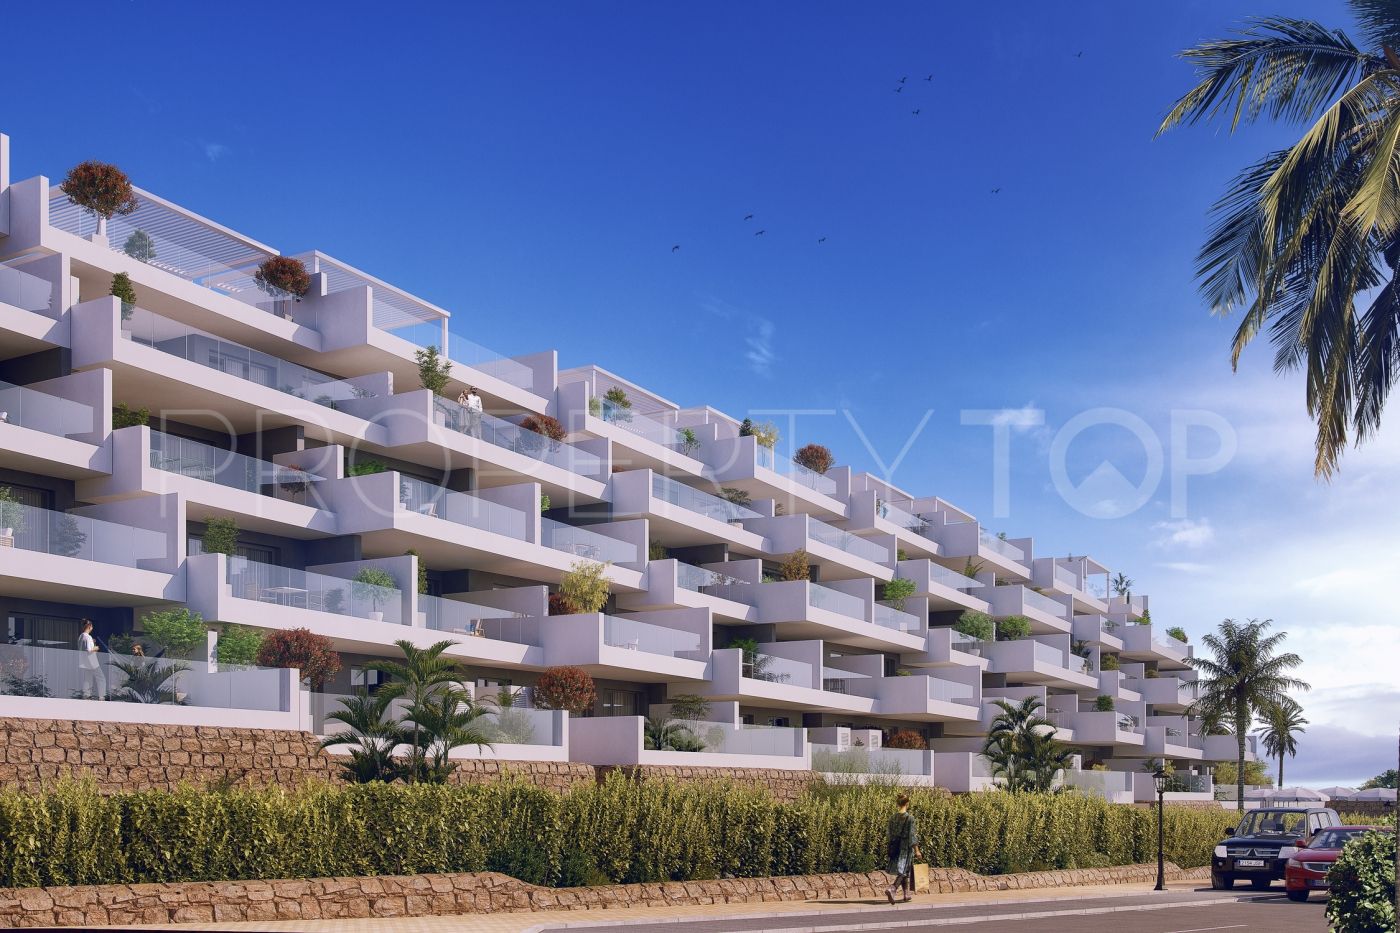 2 bedrooms penthouse in Manilva for sale